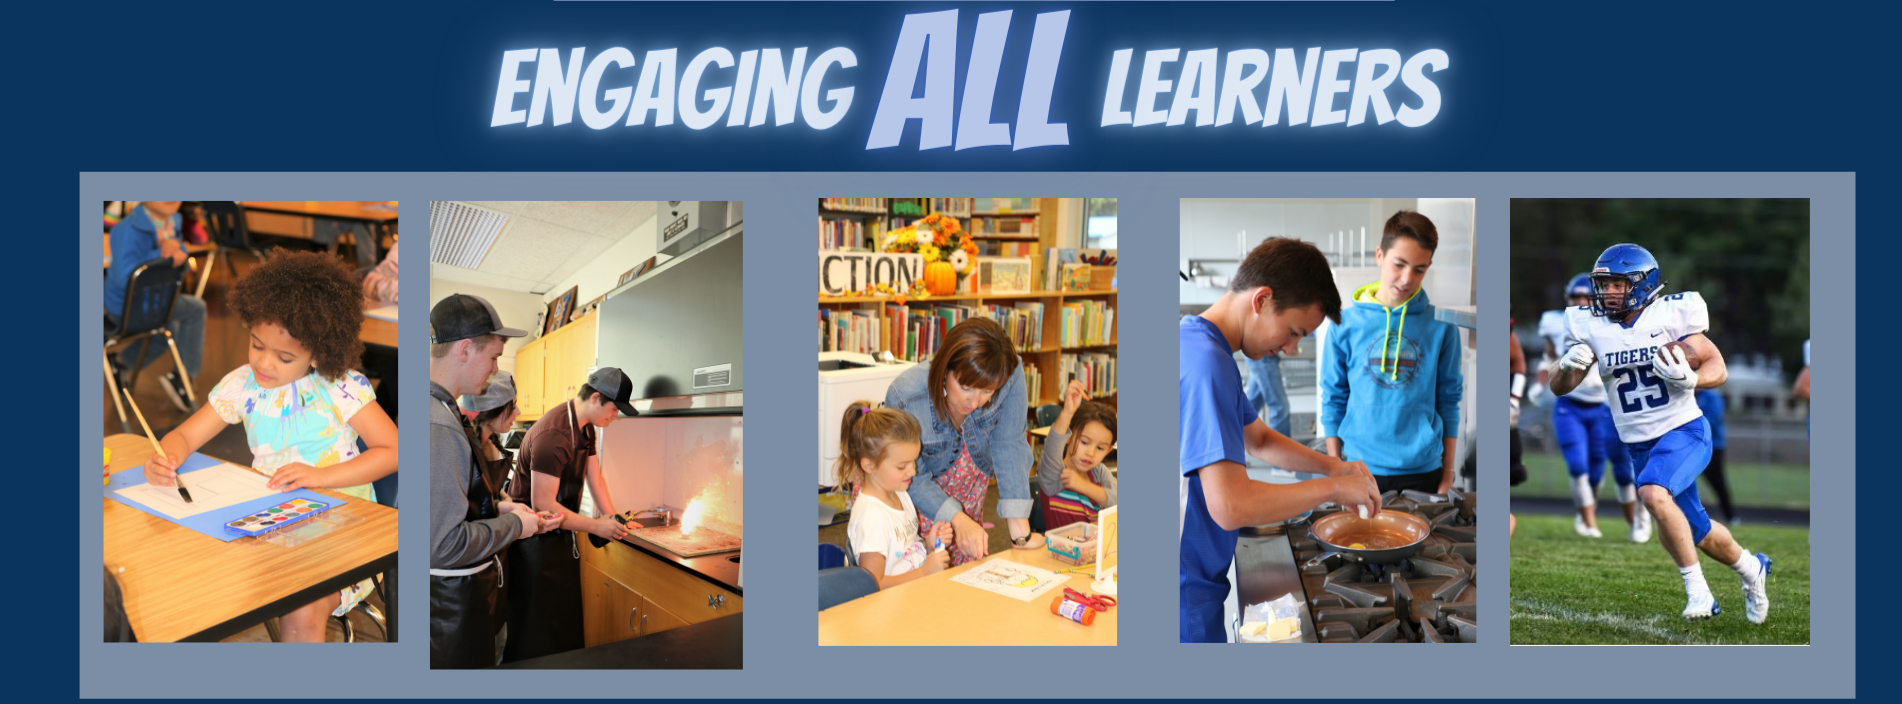 Engaging All Learners Enroll Now! 541-663-3202